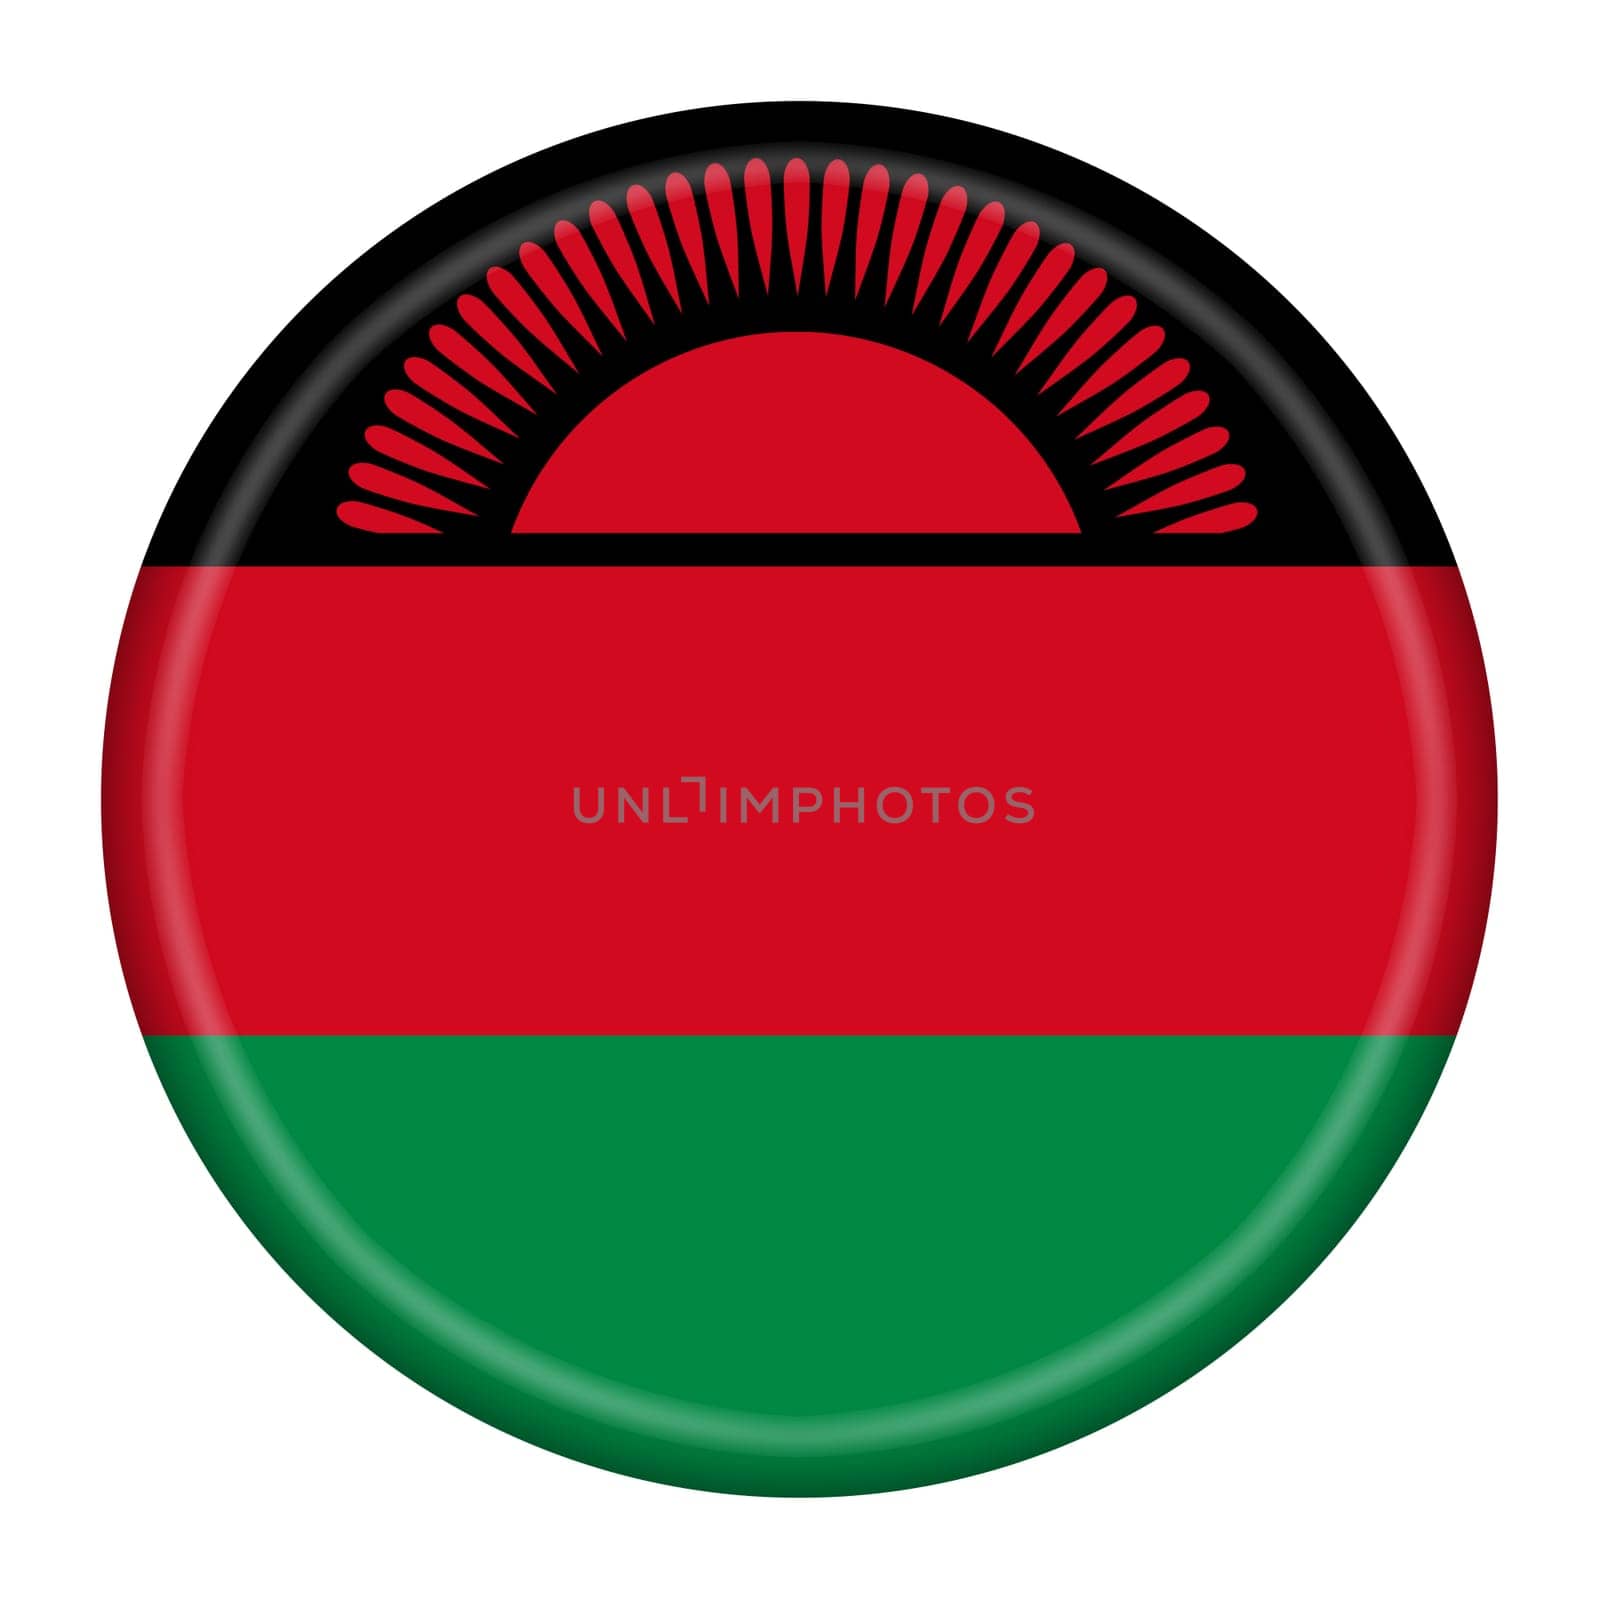 Malawi flag button 3d illustration with clipping path by VivacityImages